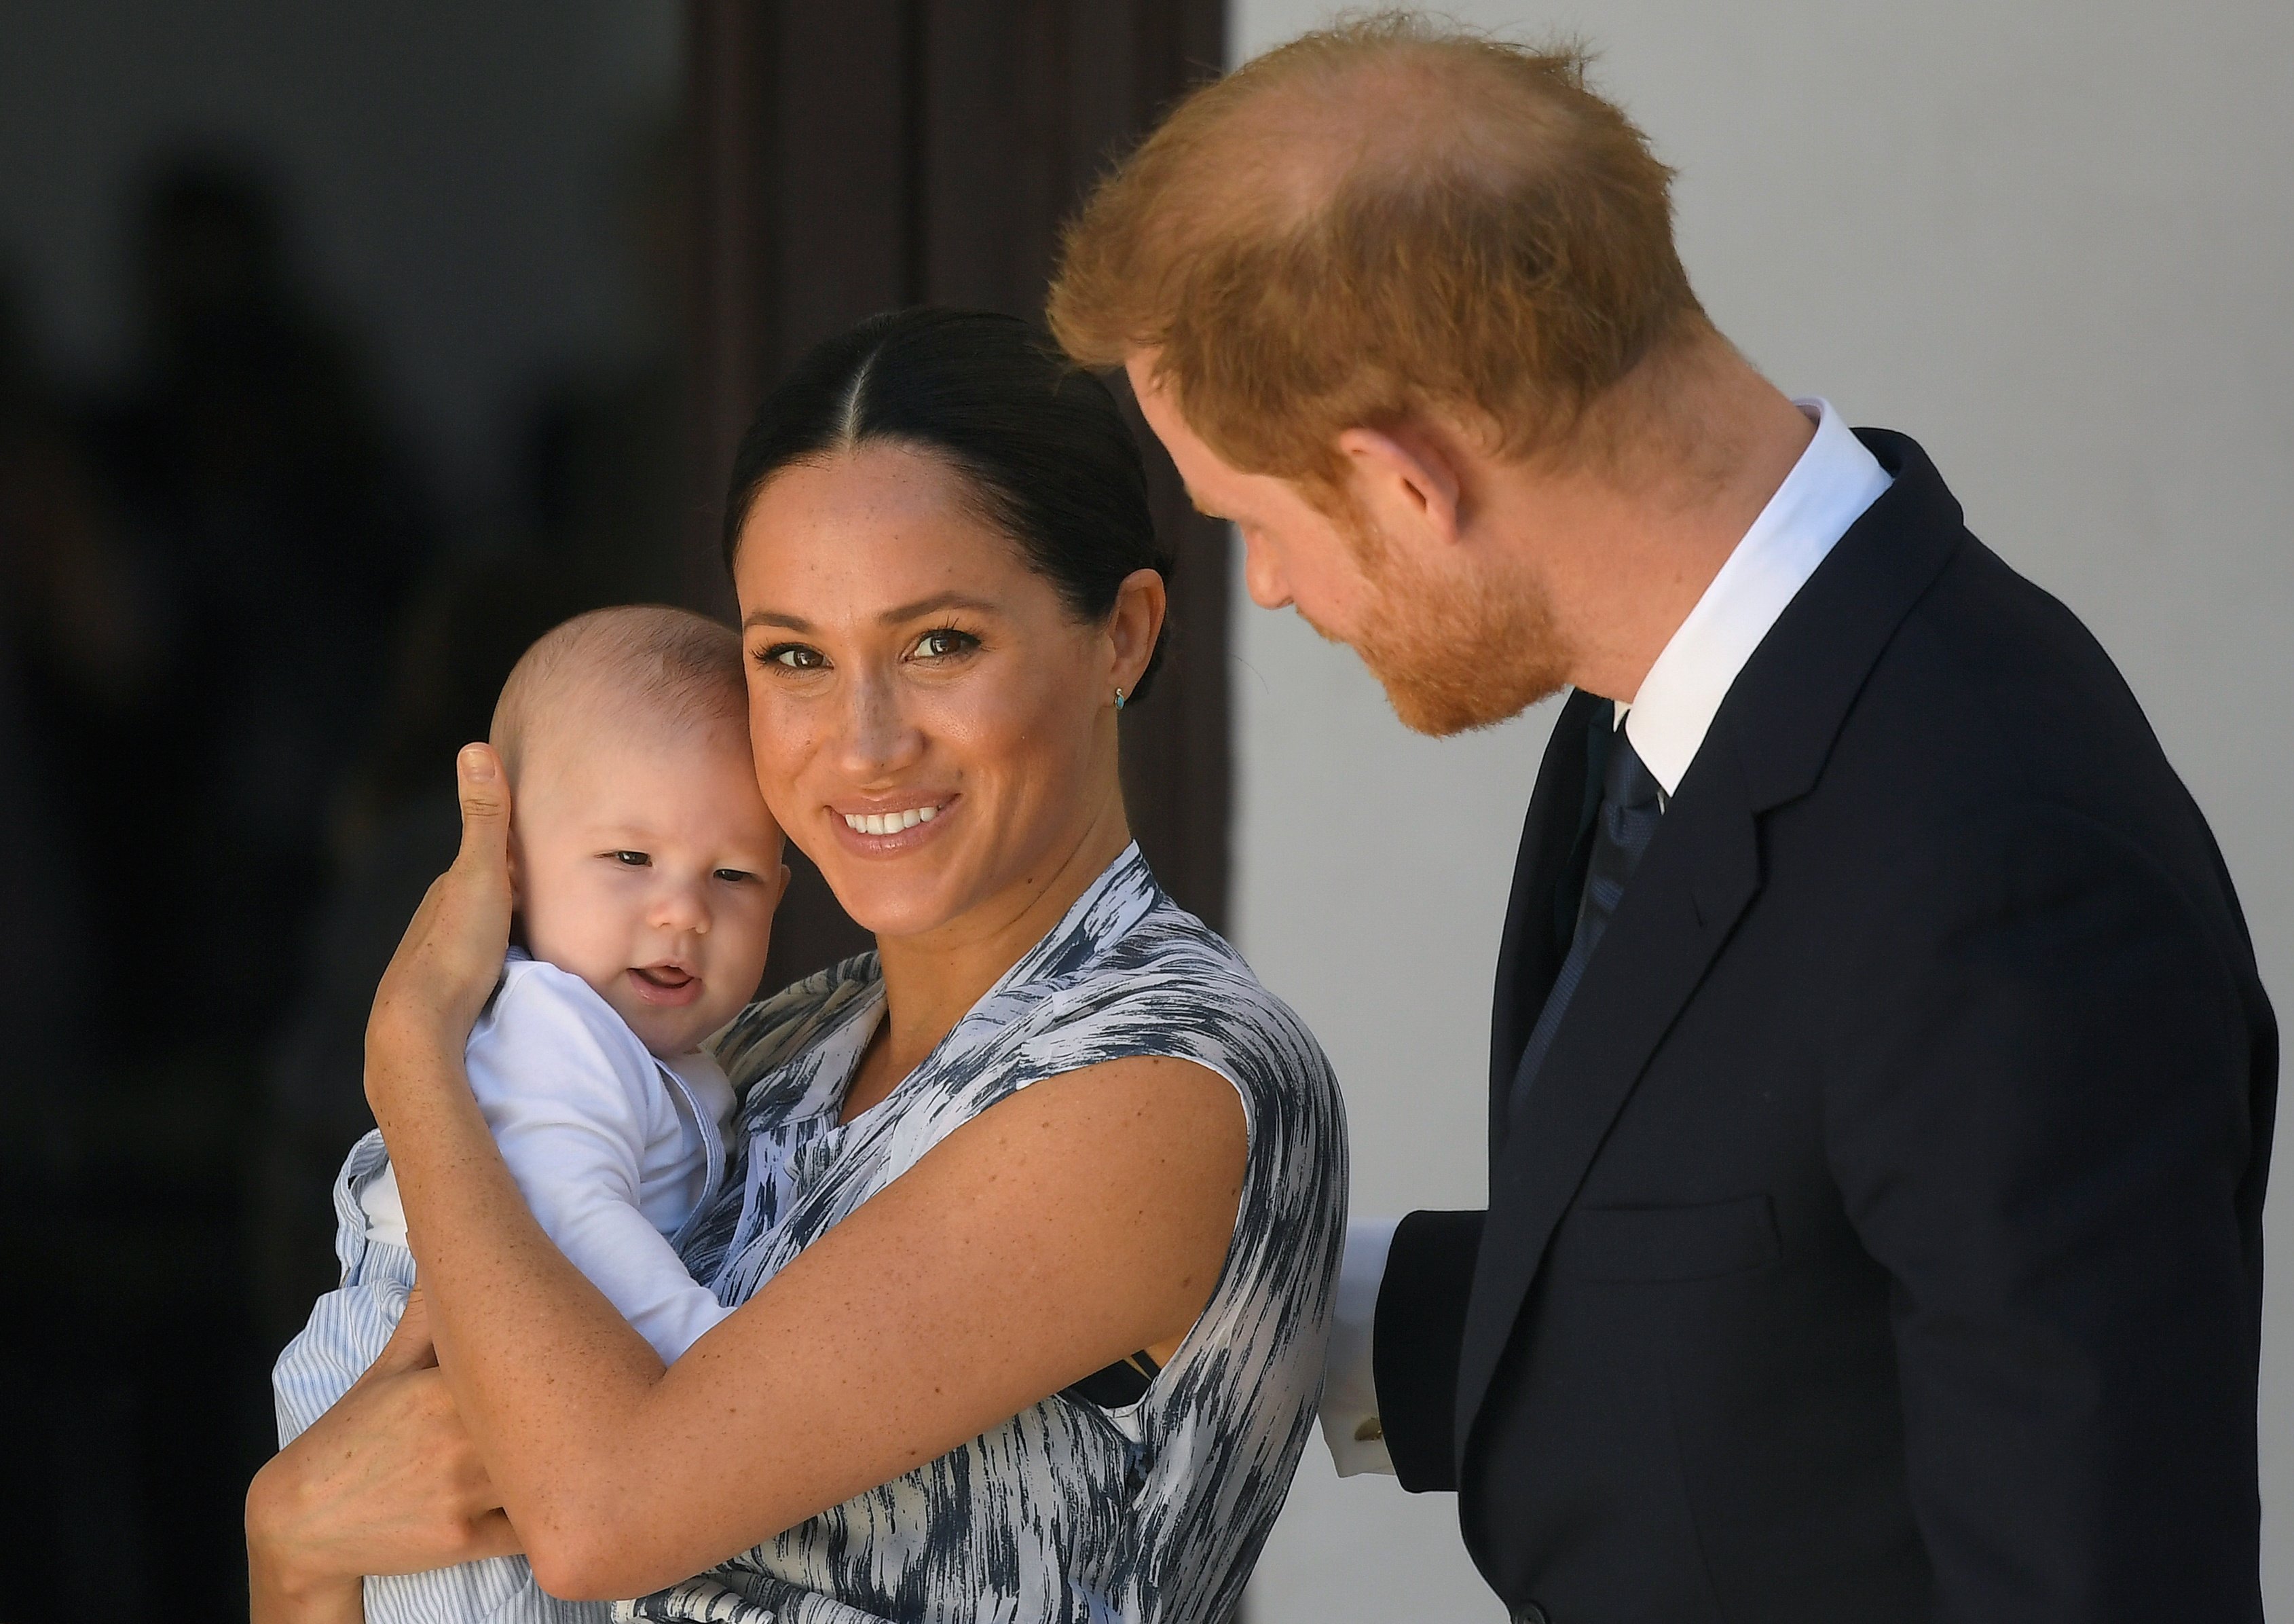 Prince Harry, Duke of Sussex and Meghan, Duchess of Sussex and their baby son Archie Mountbatten-Windsor in South Africa on September 25, 2019 in Cape Town, South Africa. | Source: Getty Image